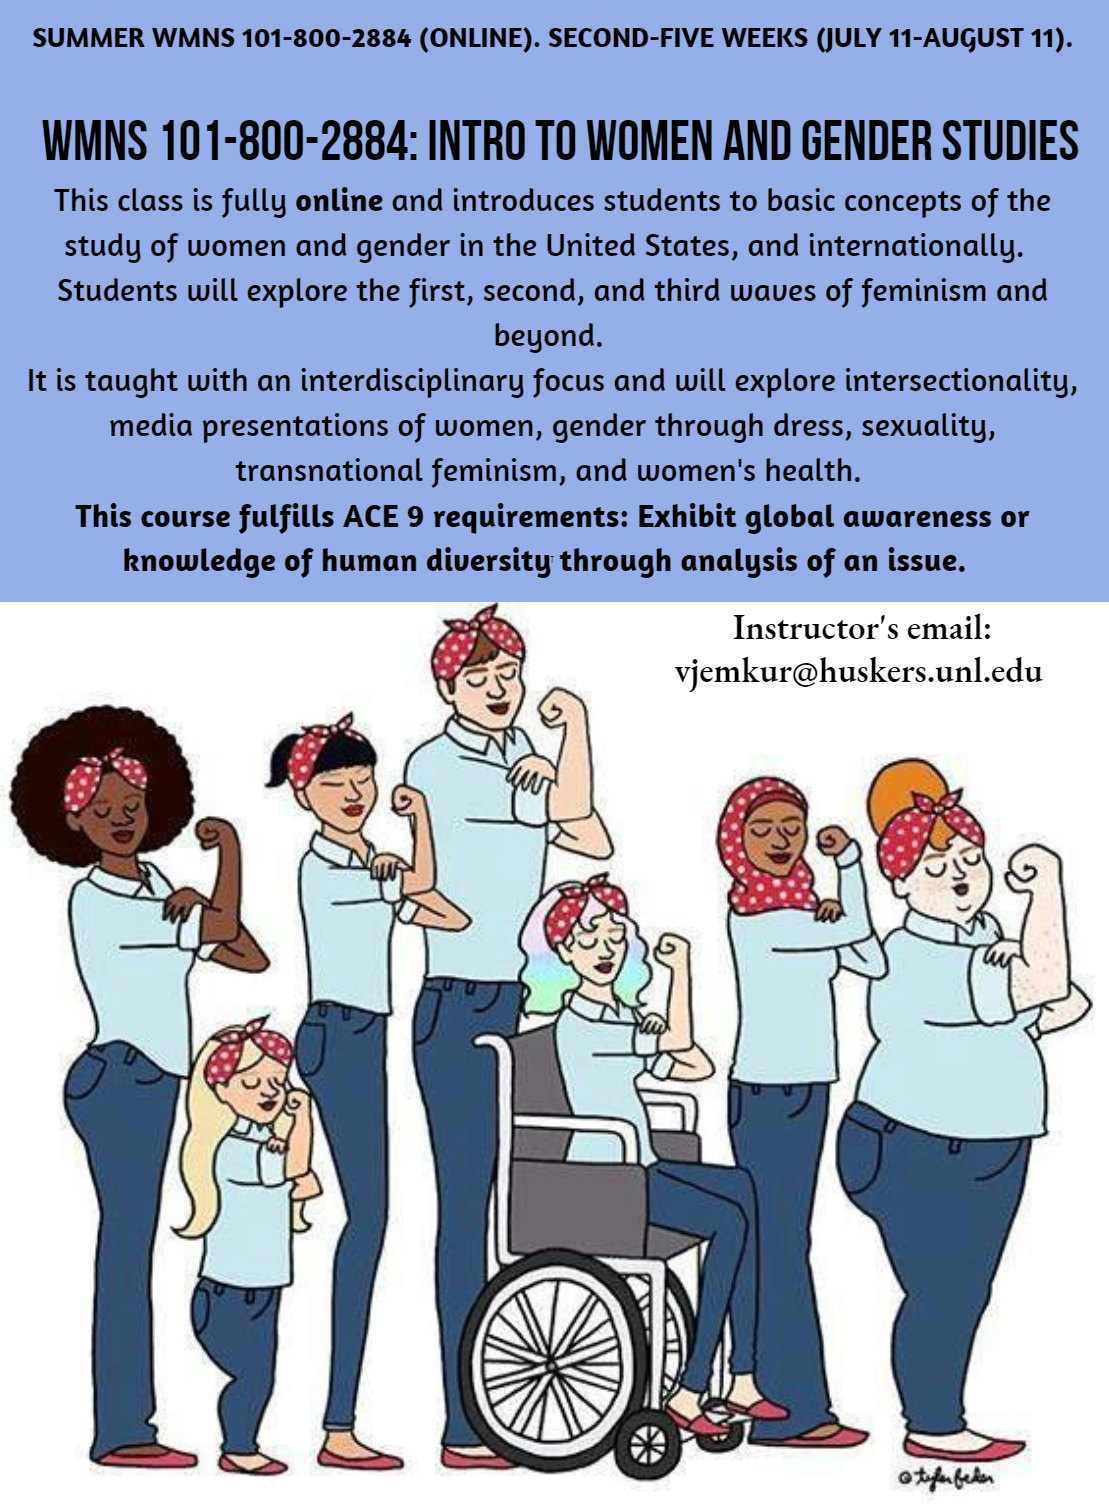 WMNS 101-800-2884: Introduction to Women and Gender Studies